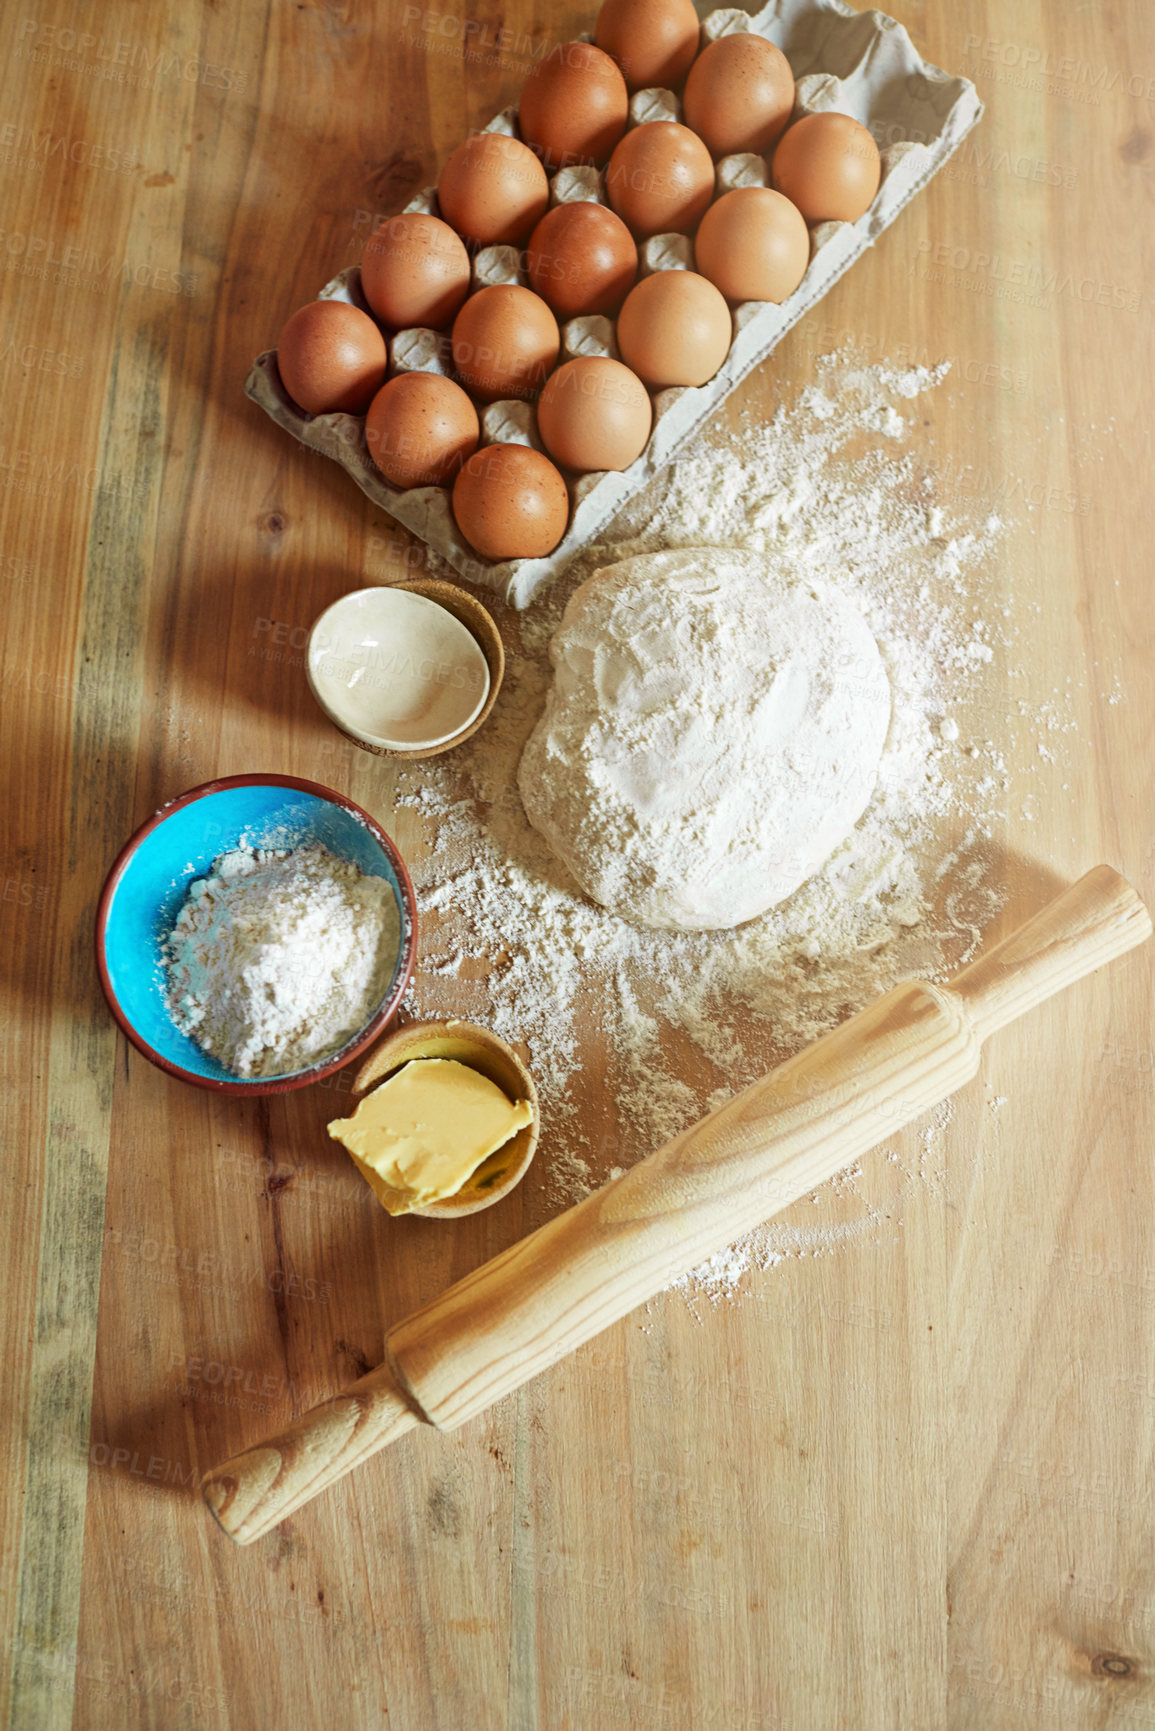 Buy stock photo High angle shot of a group of ingredients on a kitchen counter